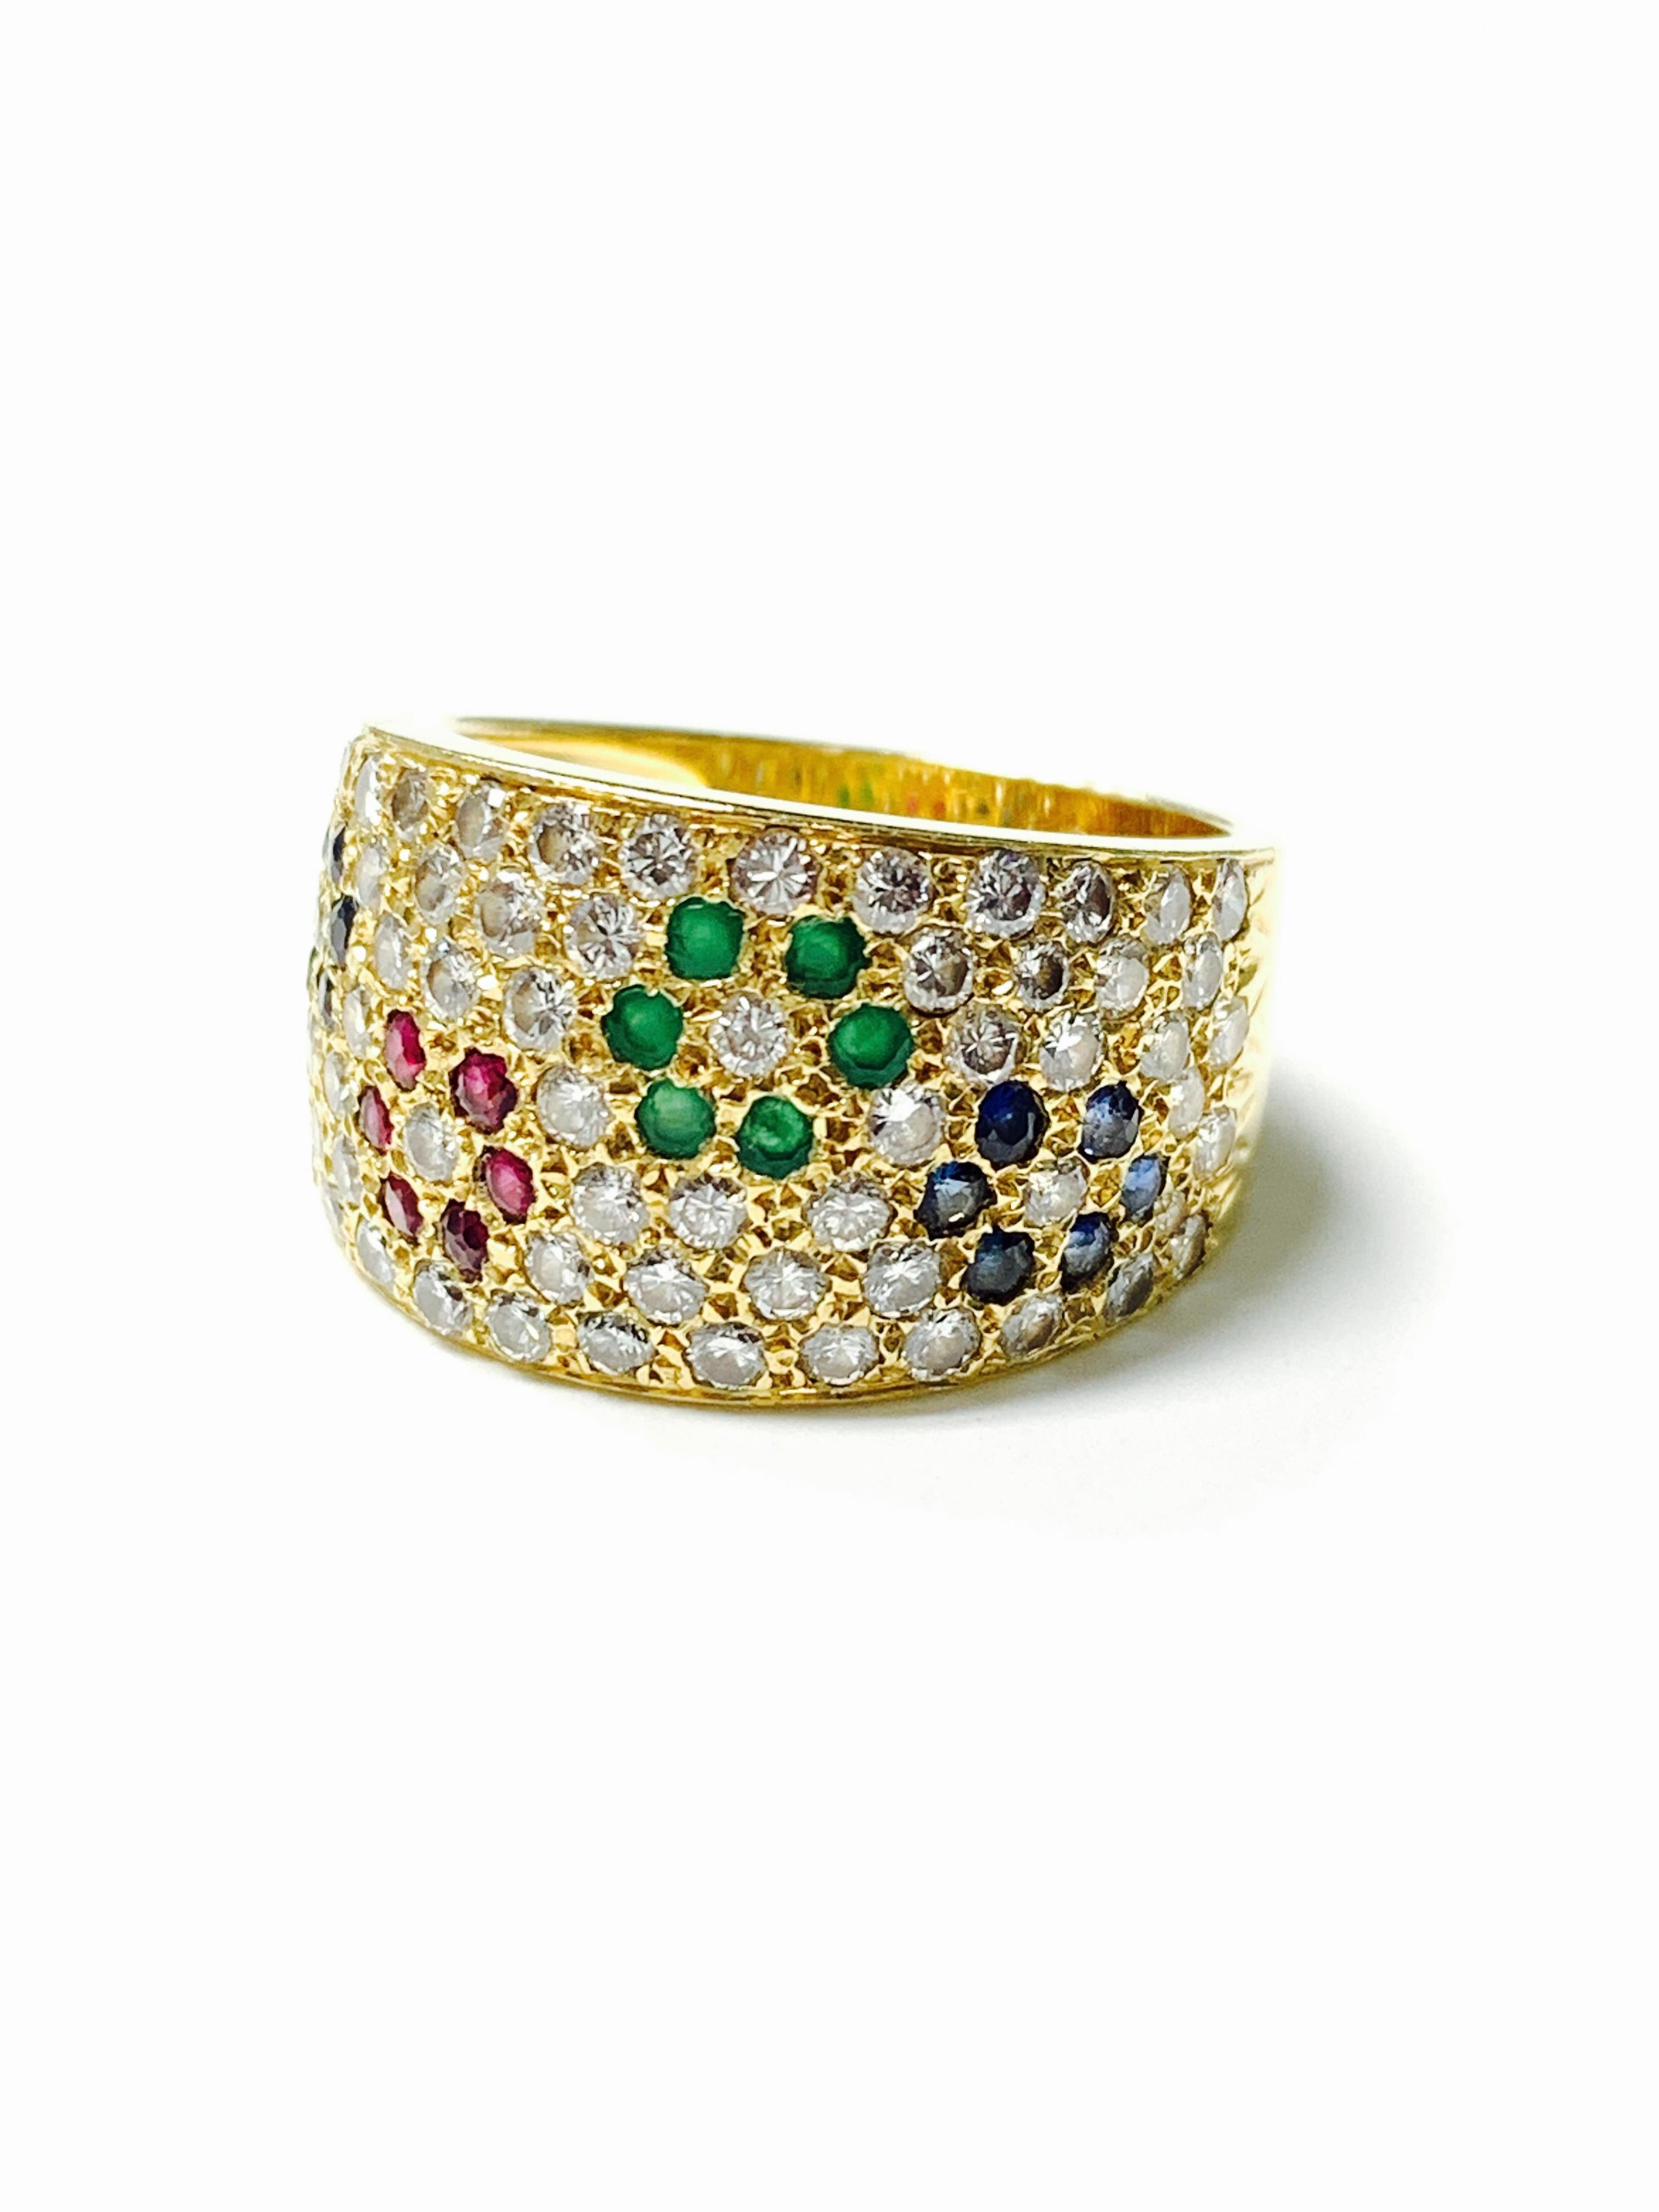 Diamond, Ruby, Emerald and Blue Sapphire Ring in 18 K Gold 2